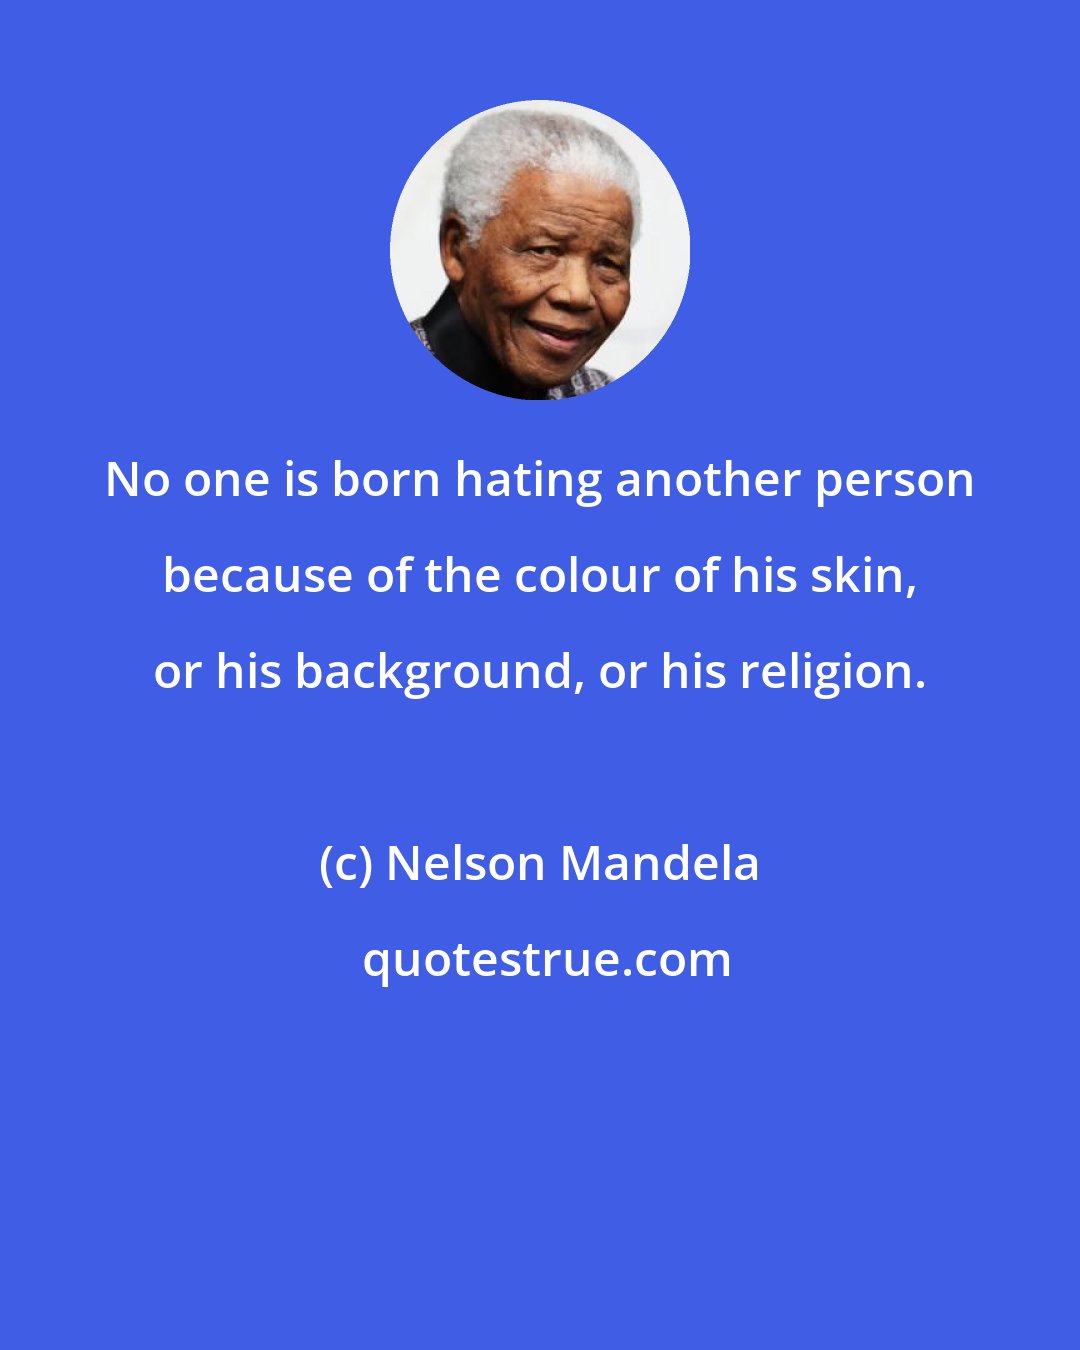 Nelson Mandela: No one is born hating another person because of the colour of his skin, or his background, or his religion.